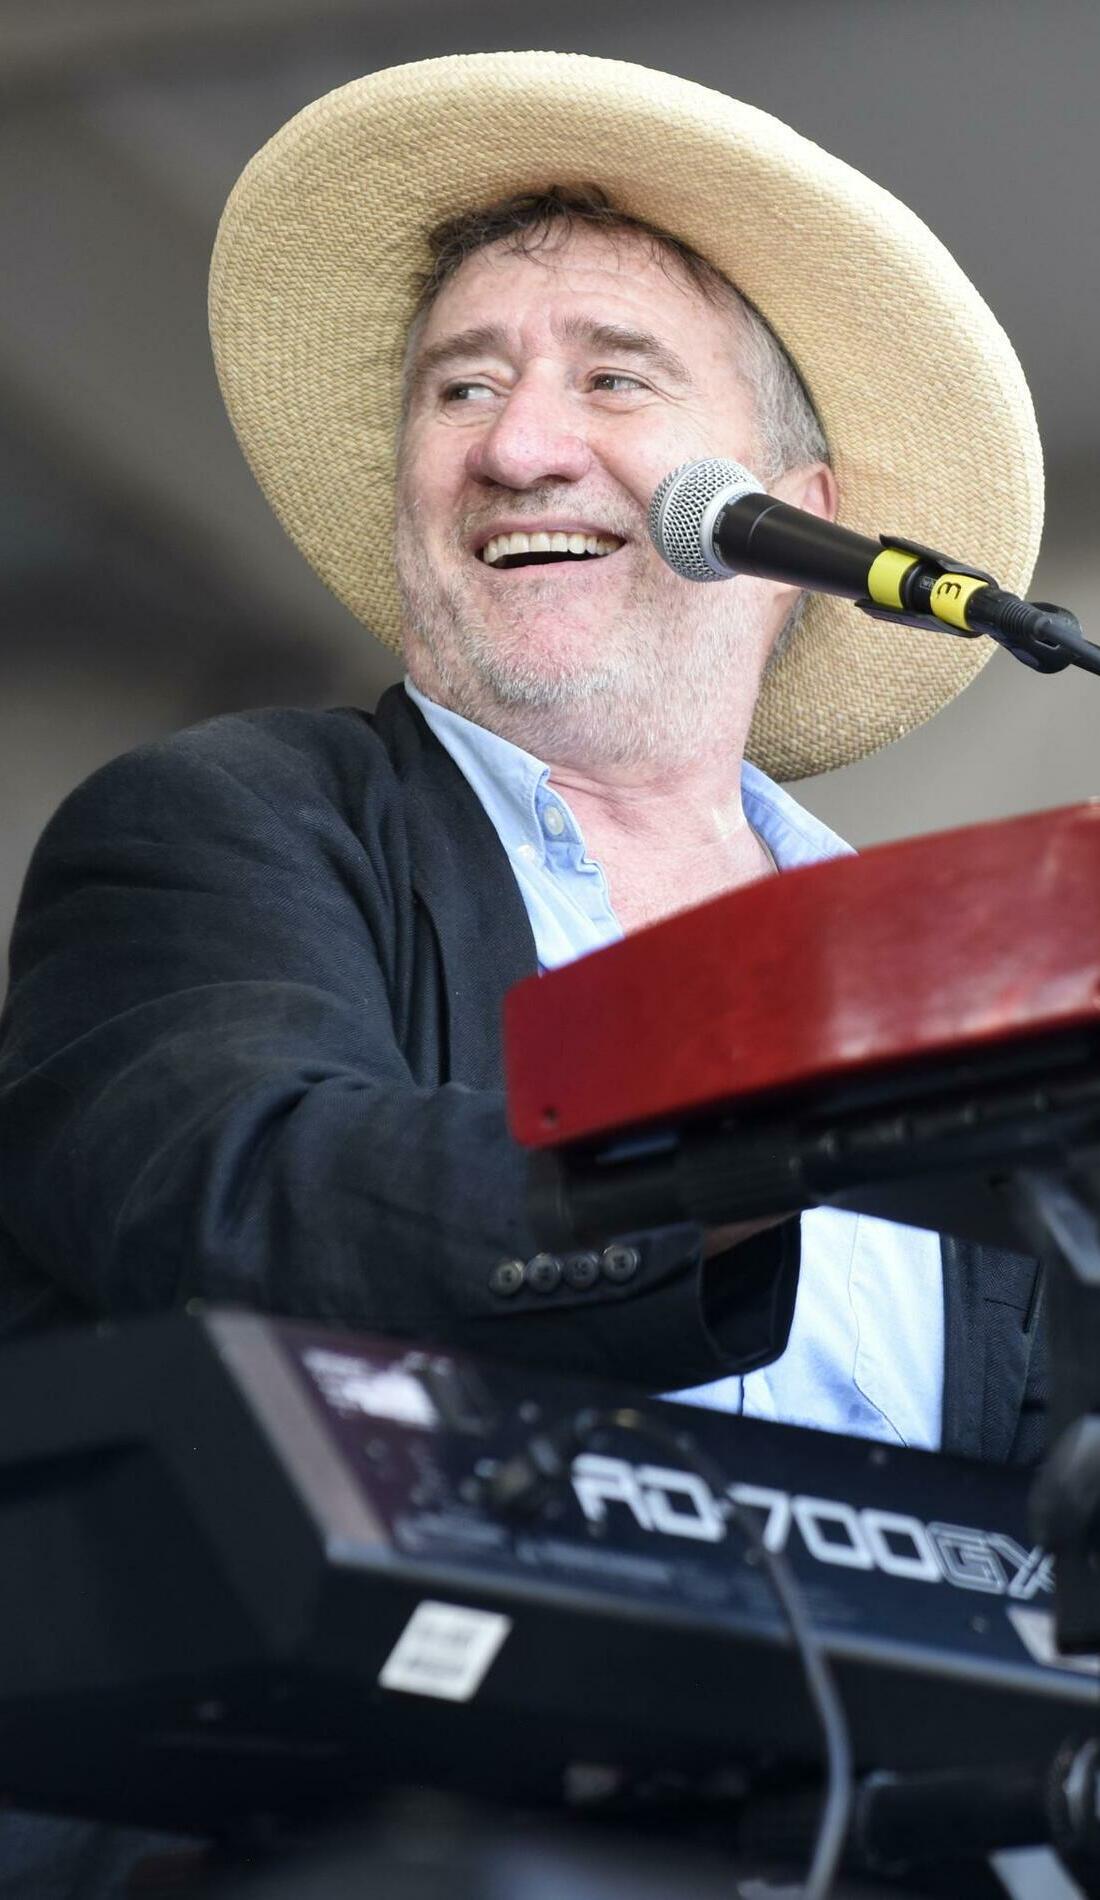 A Jon Cleary live event